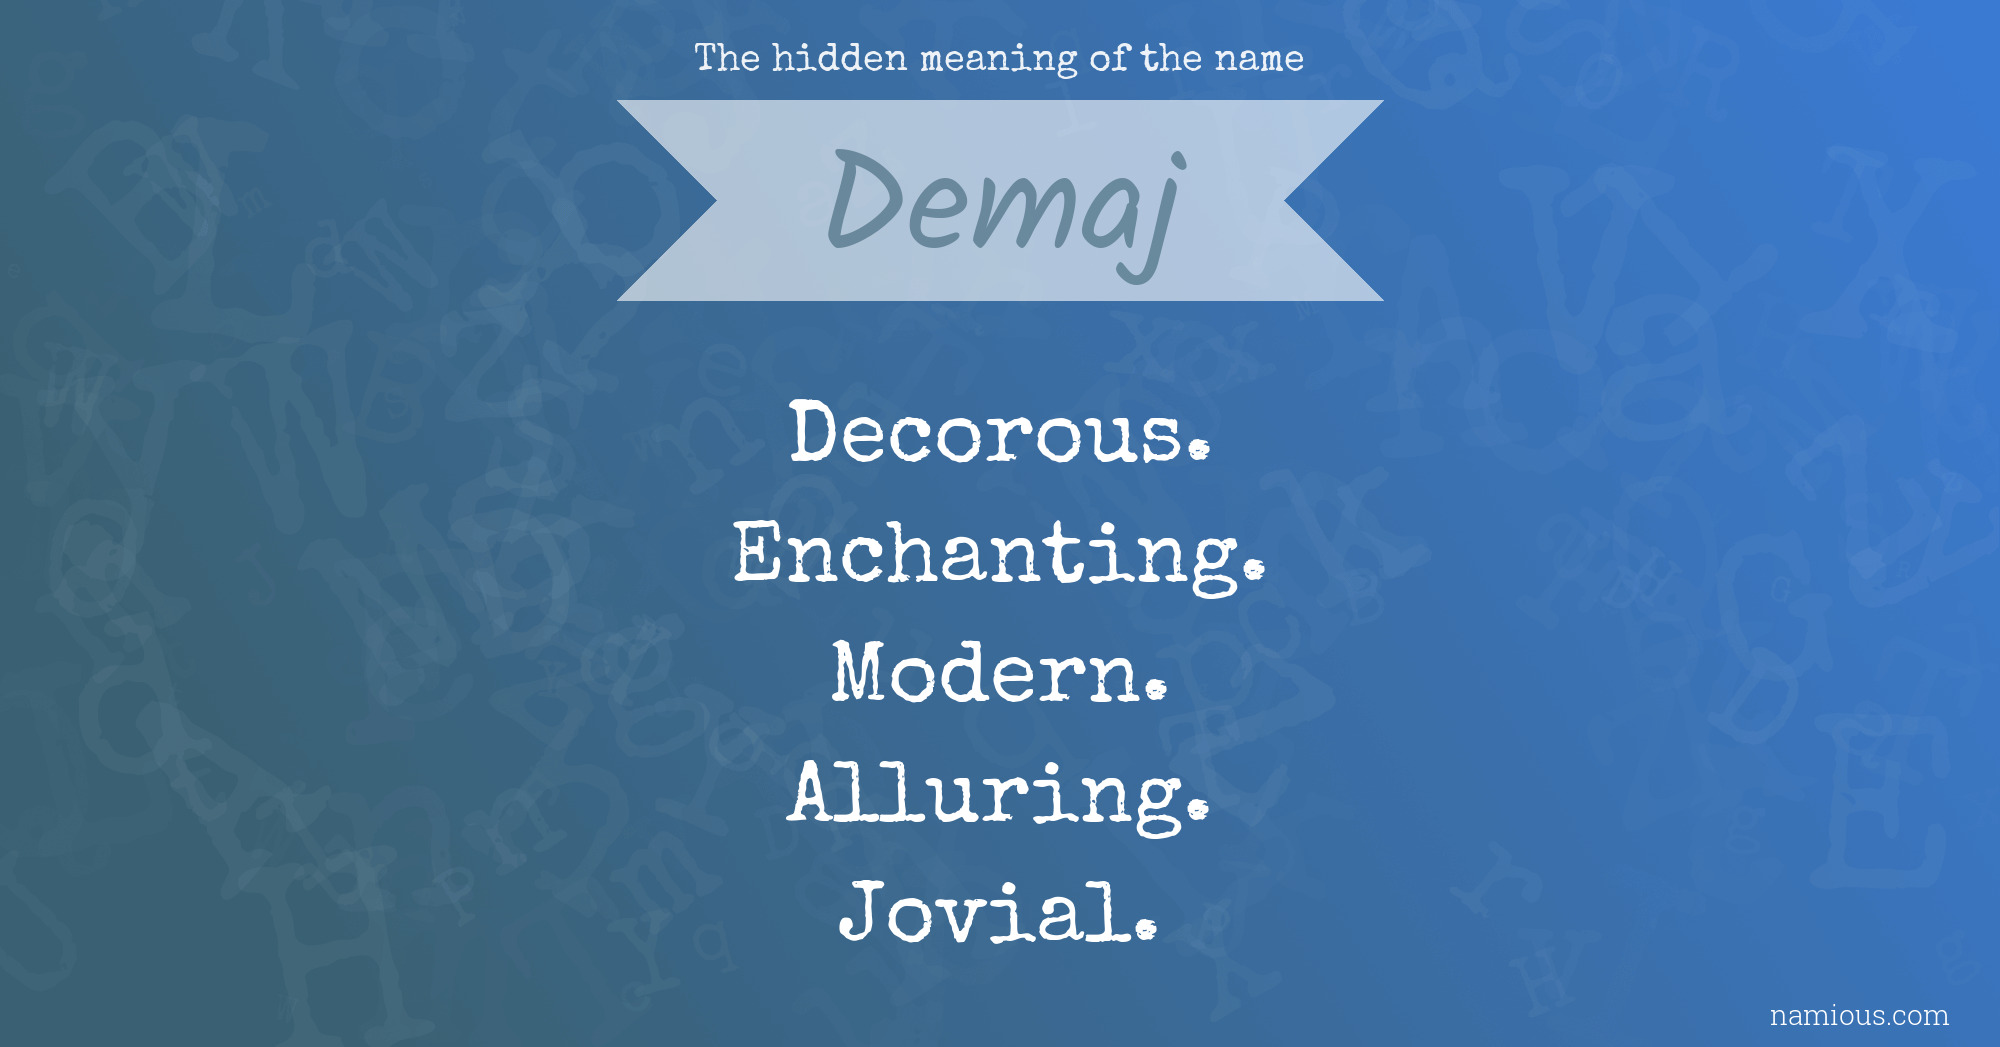 The hidden meaning of the name Demaj